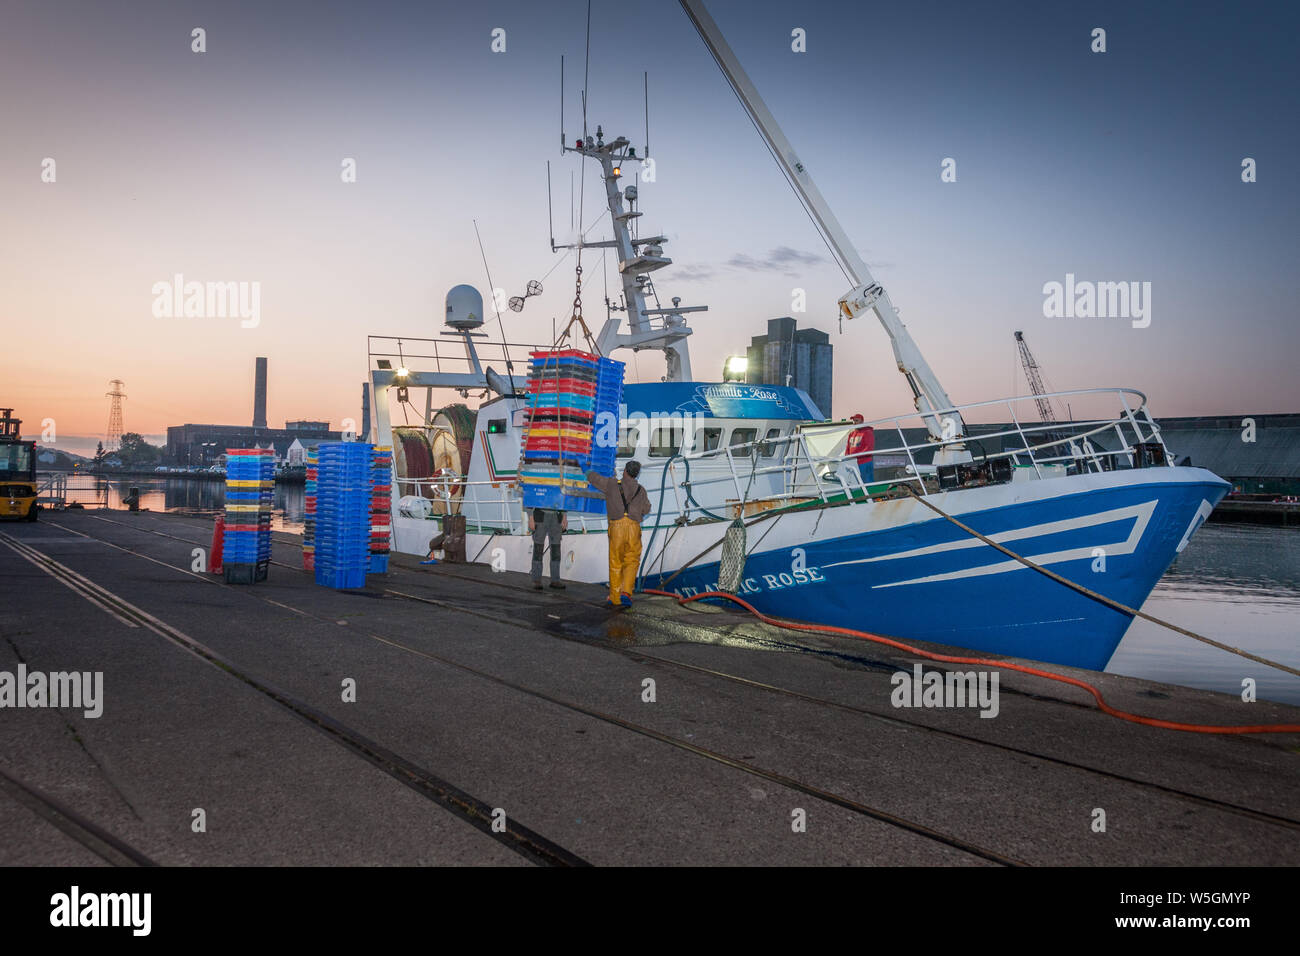 Cork City, Cork, Ireland. 29th July, 2019. Crew of the trawler Atlantic Rose load empty fish boxes on to the deck as they prepare their boat to depart for the fishing grounds on Horgan's Quay in Cork City, Ireland. Credit;  David Creedon / Alamy Live News Stock Photo